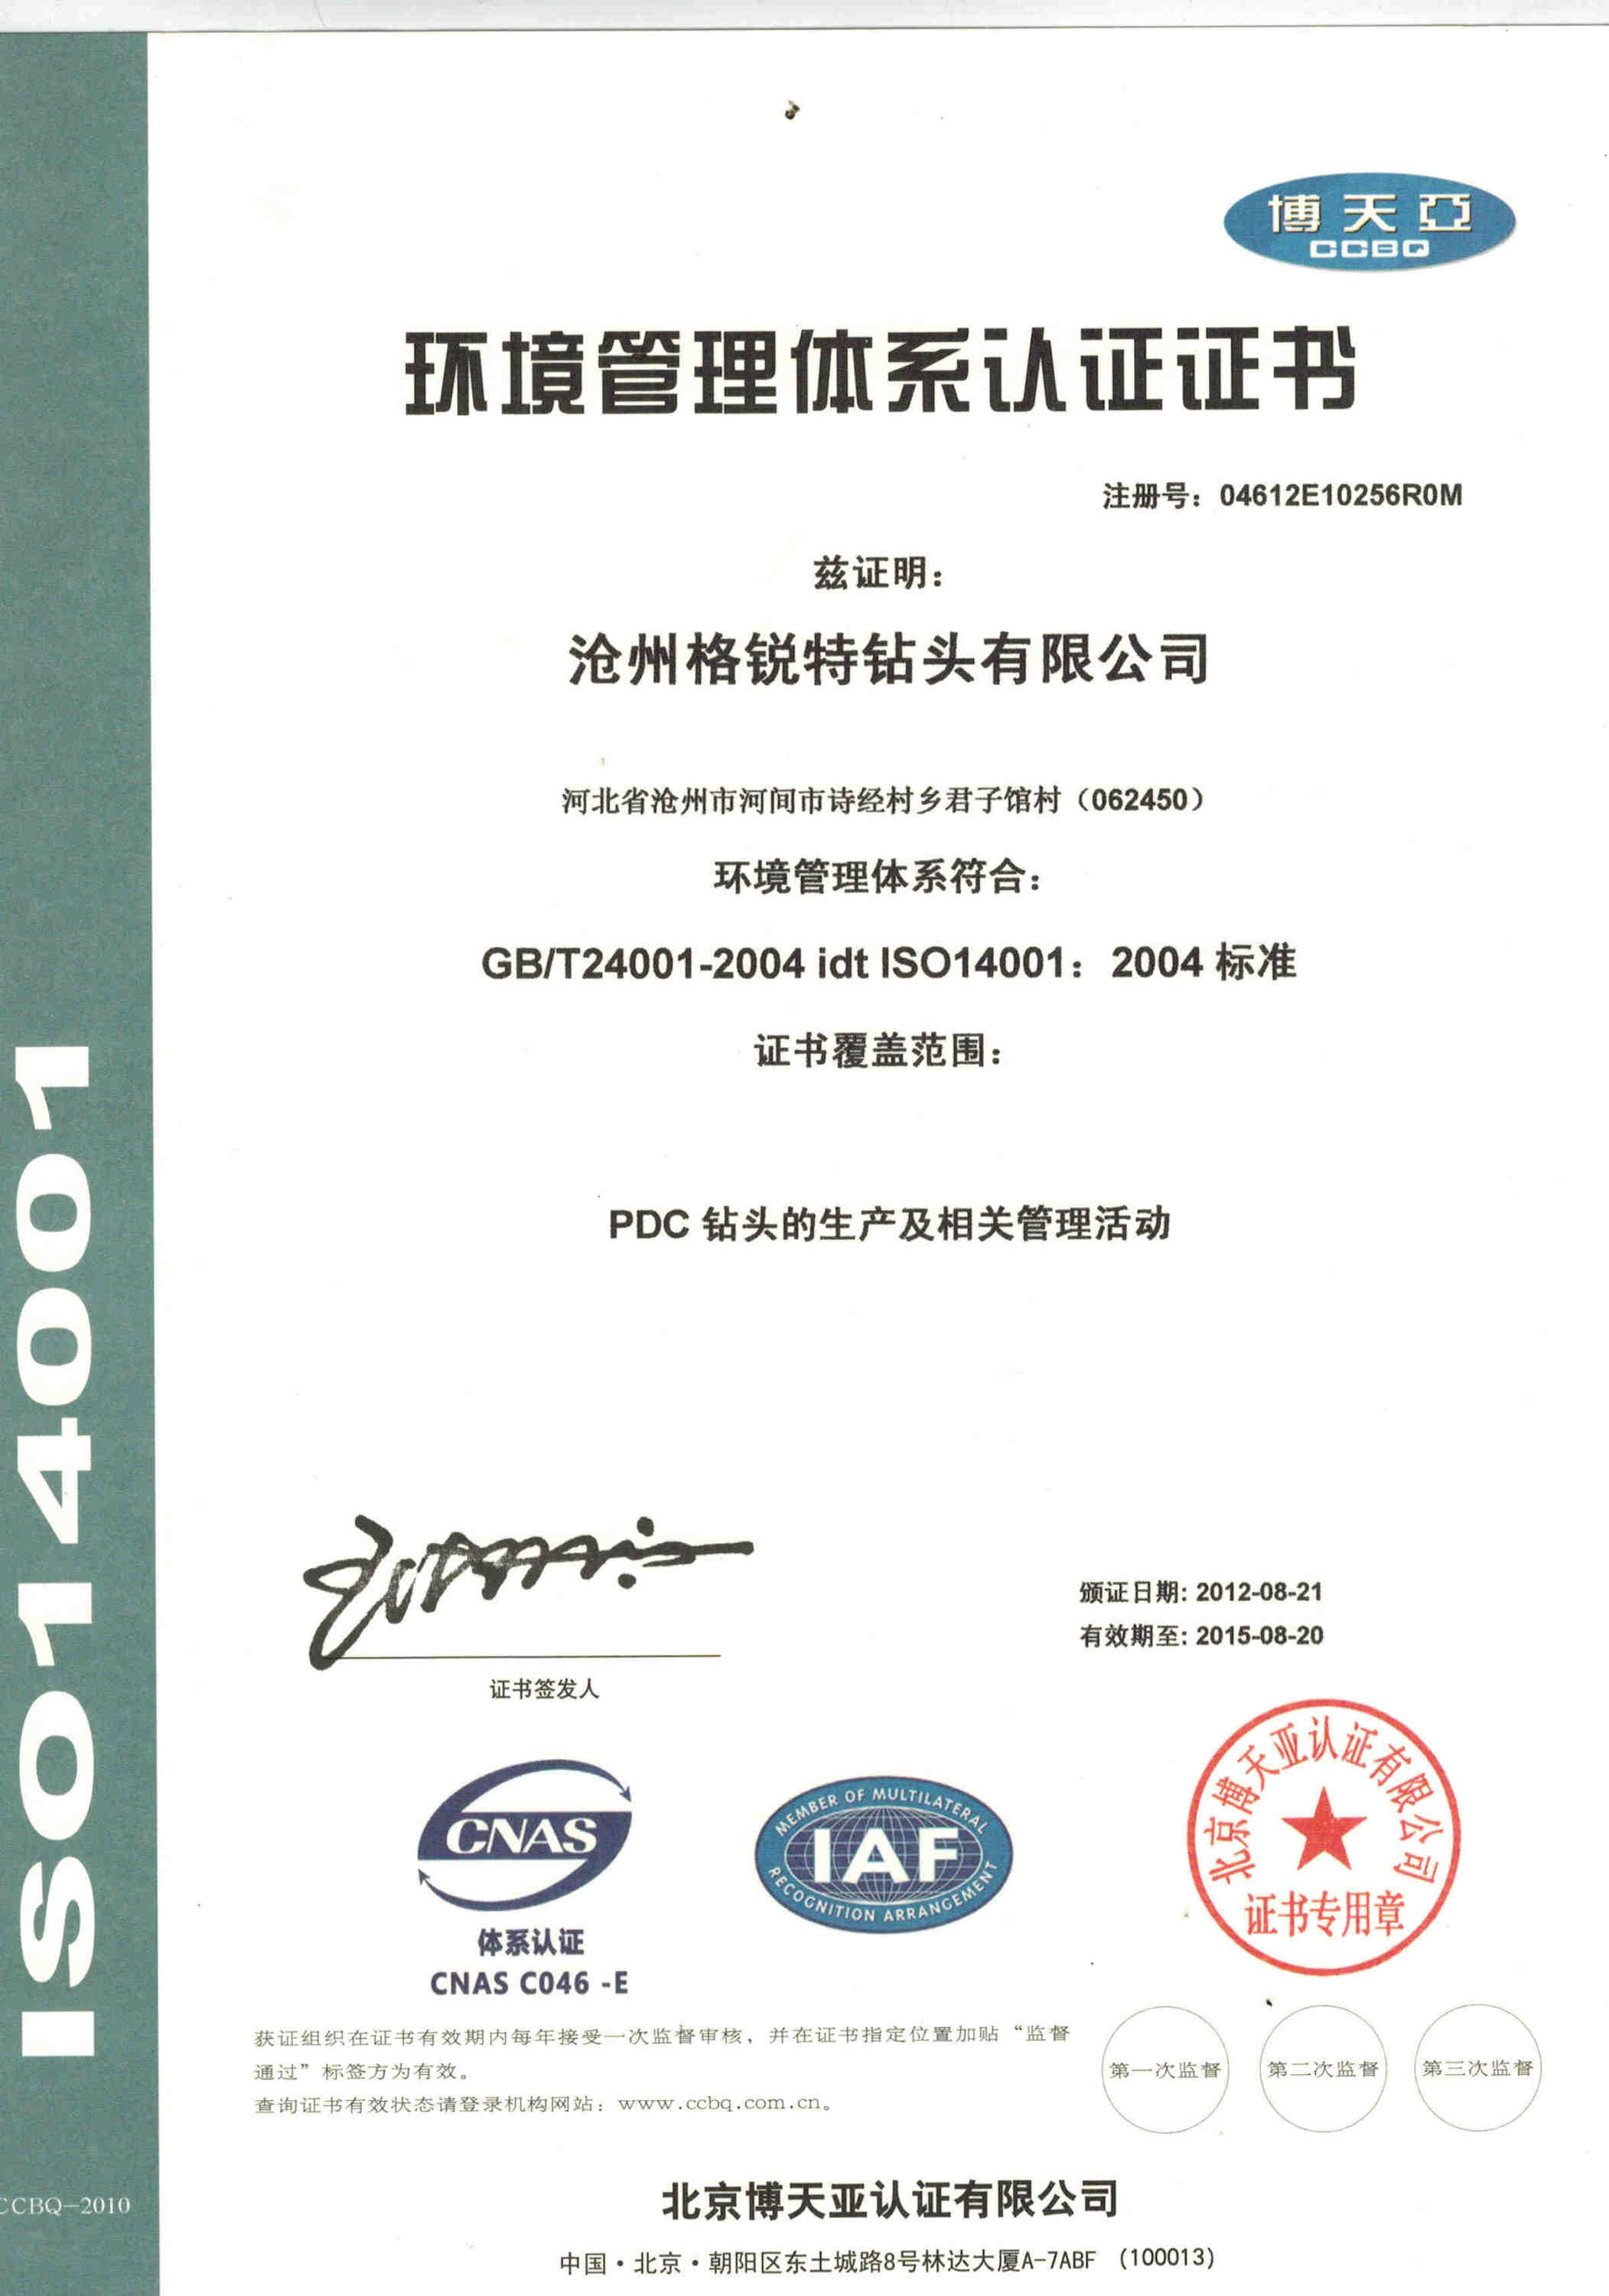 ENVIRONMENTAL MANAGEMENT STSTEM CERTIFICATE CHINESE EDITION Cangzhou